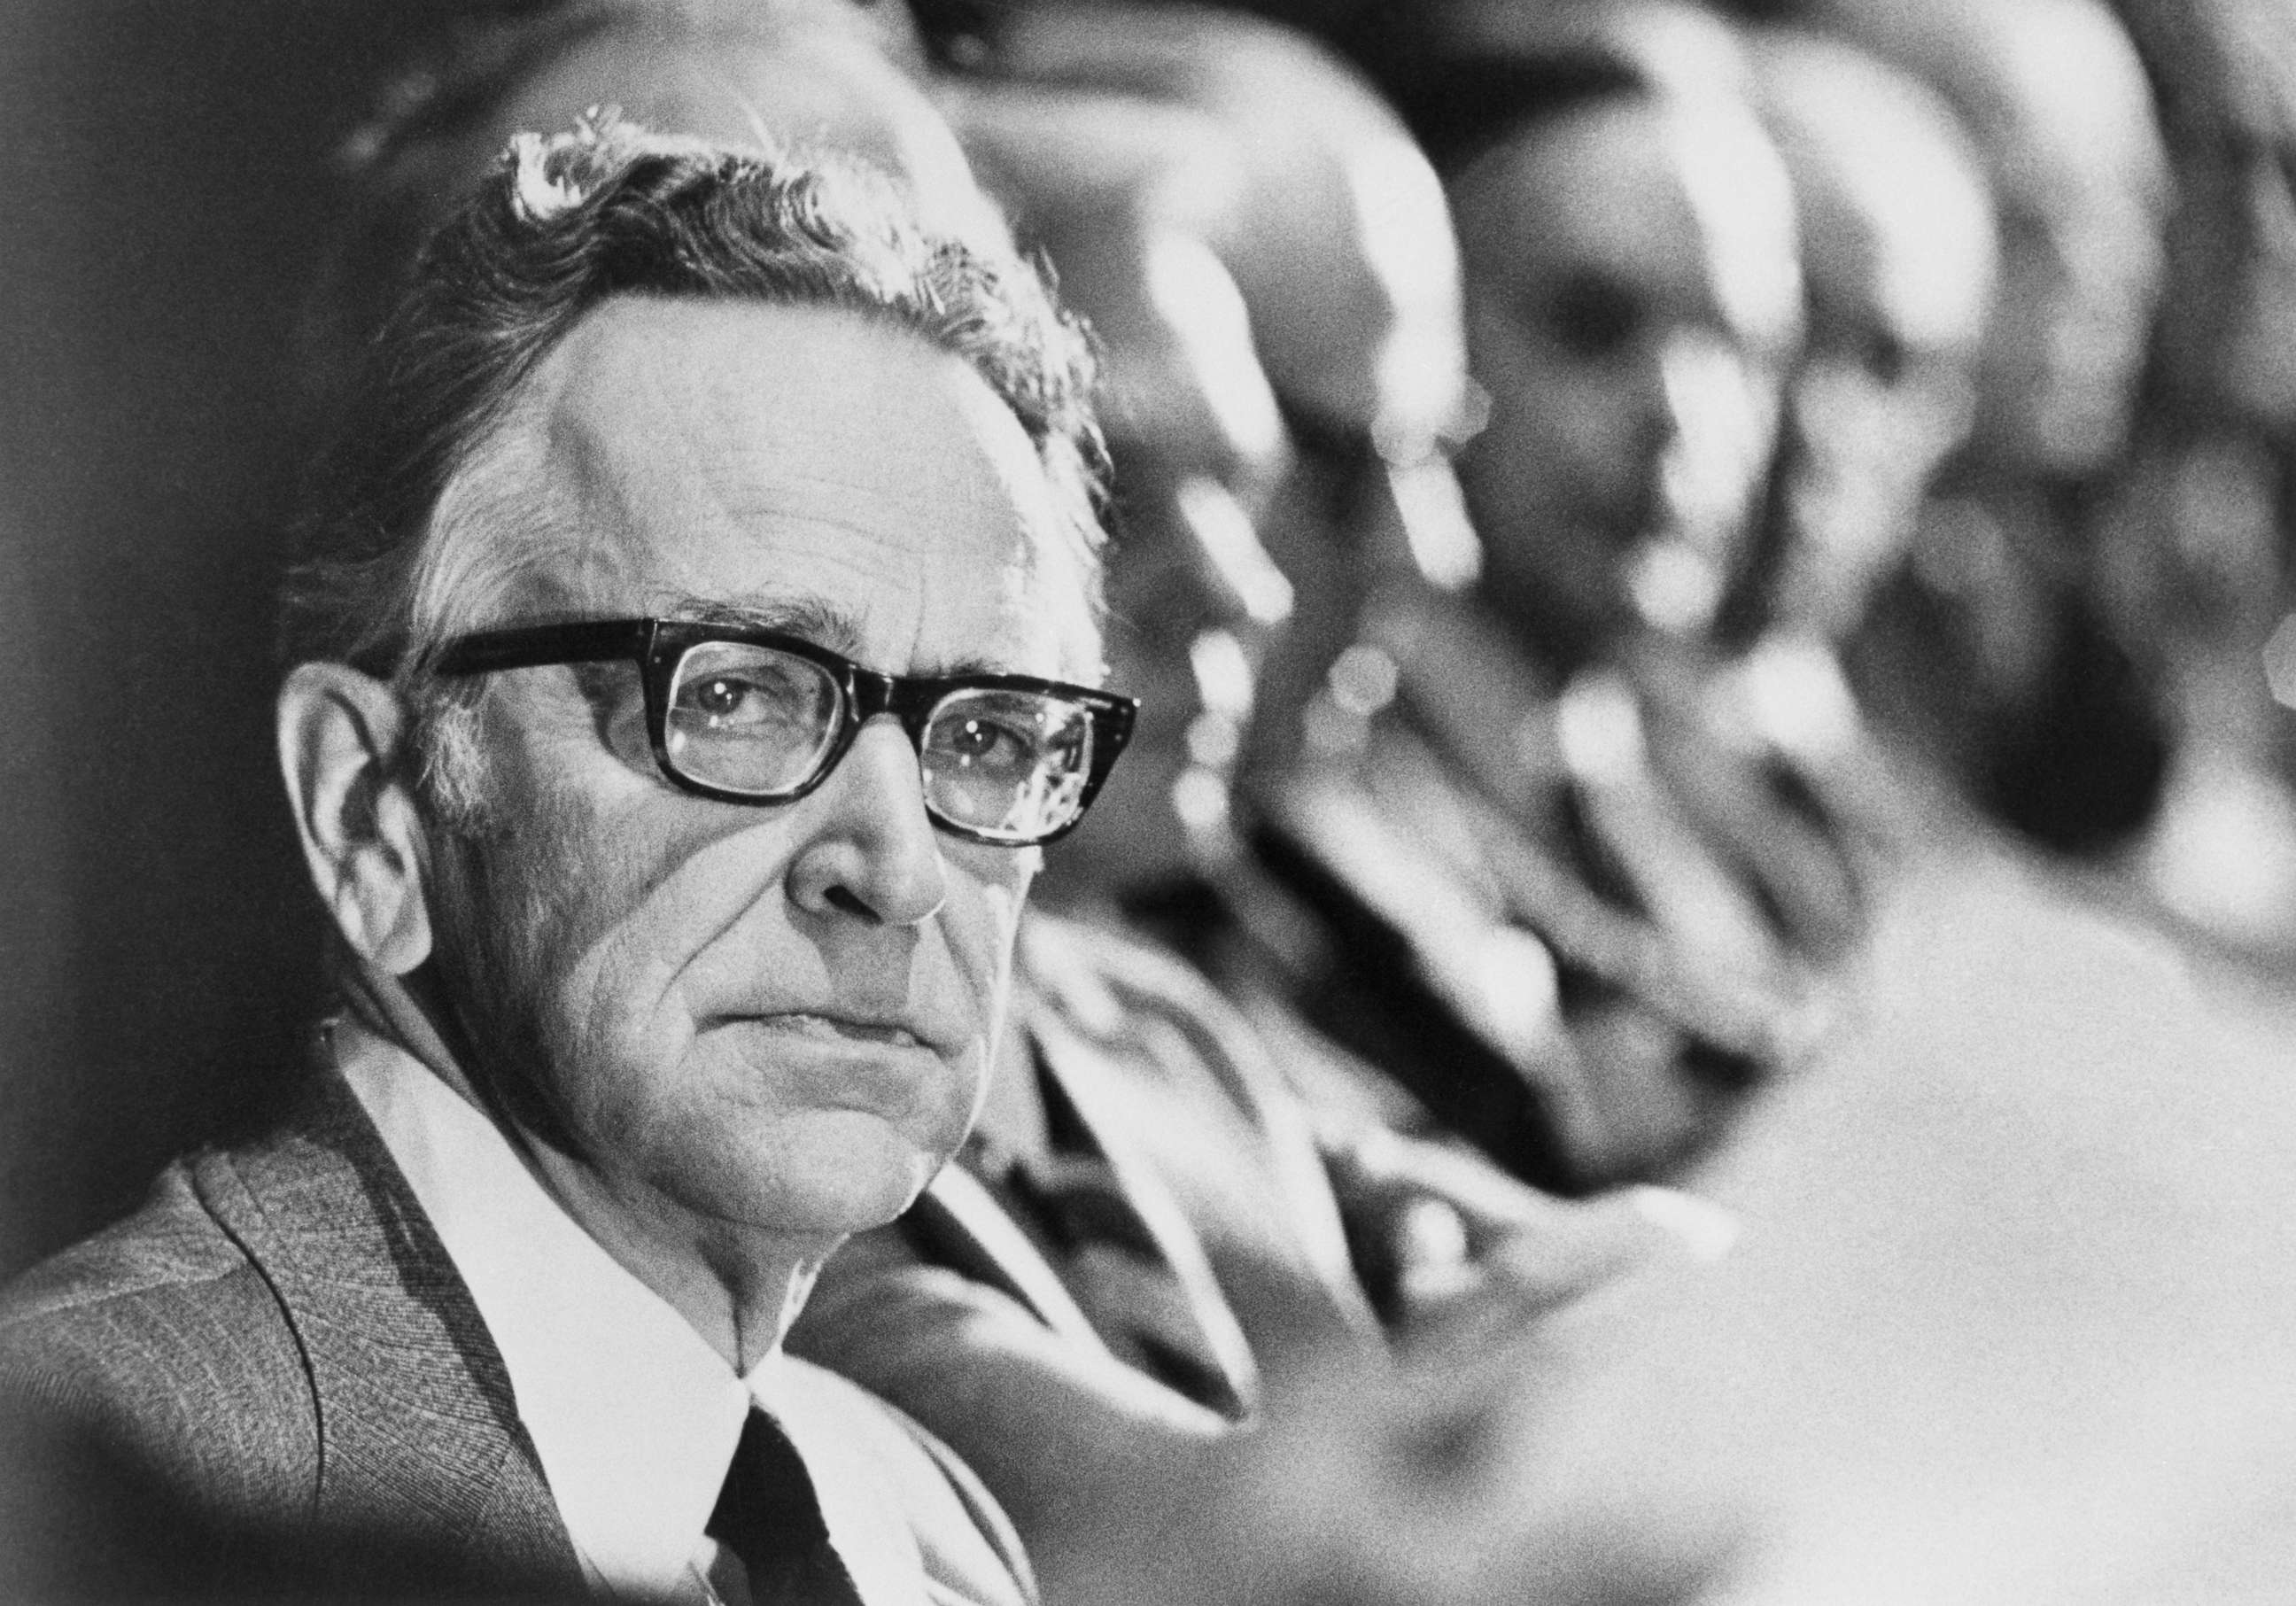 PHOTO: Associate Justice Harry Blackmun of the US Supreme Court said that the abortion decision he wrote a year ago, "will be regarded as one of the worst mistakes in the court's history or one of its greatest decisions, a turning point."